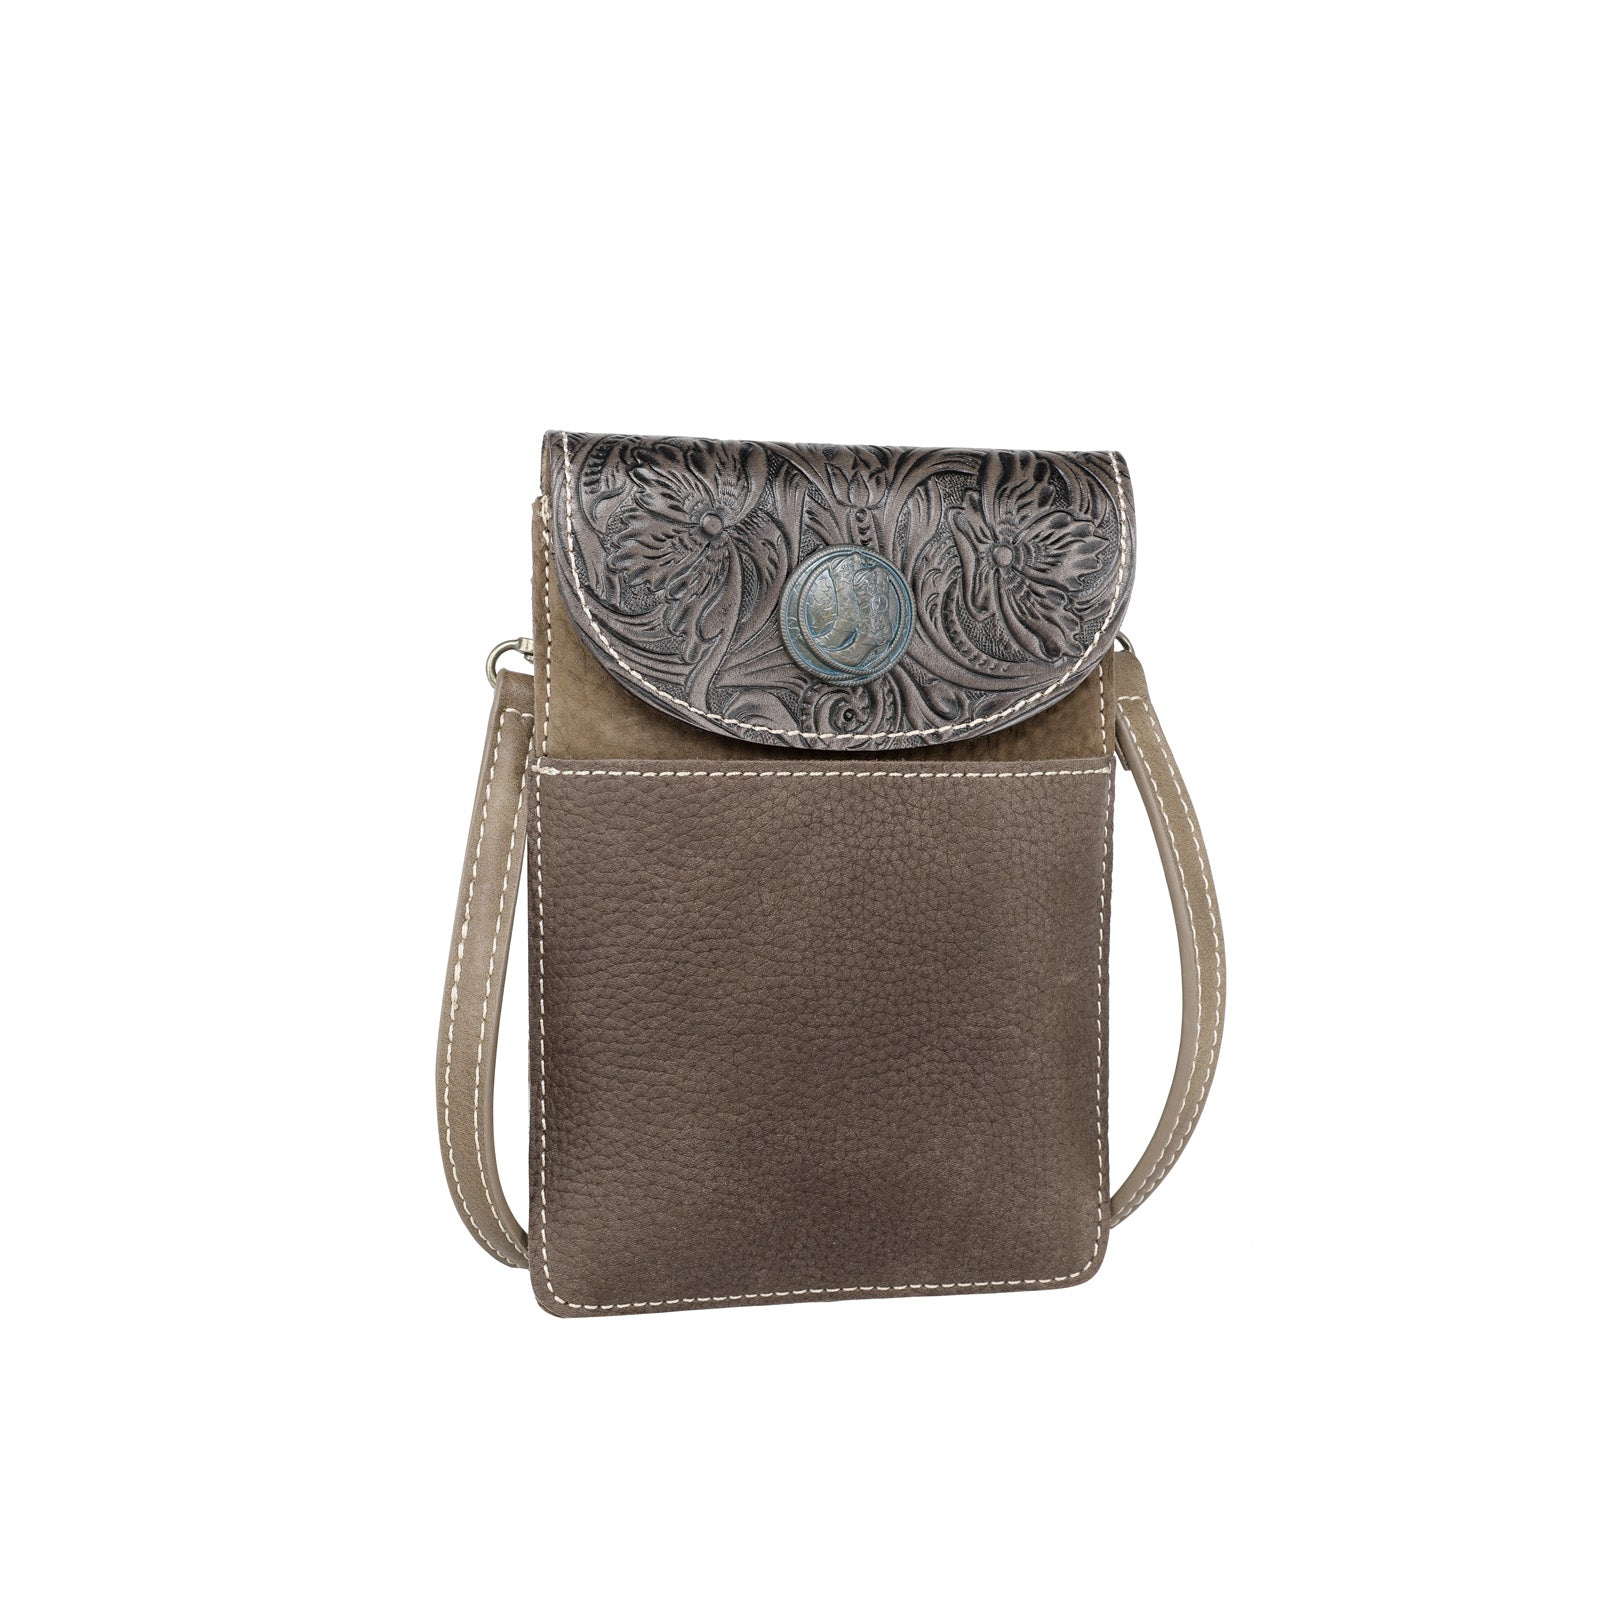 Buy Women's Brown Leather Hip Bag With Fringe Crossbody Online in India 